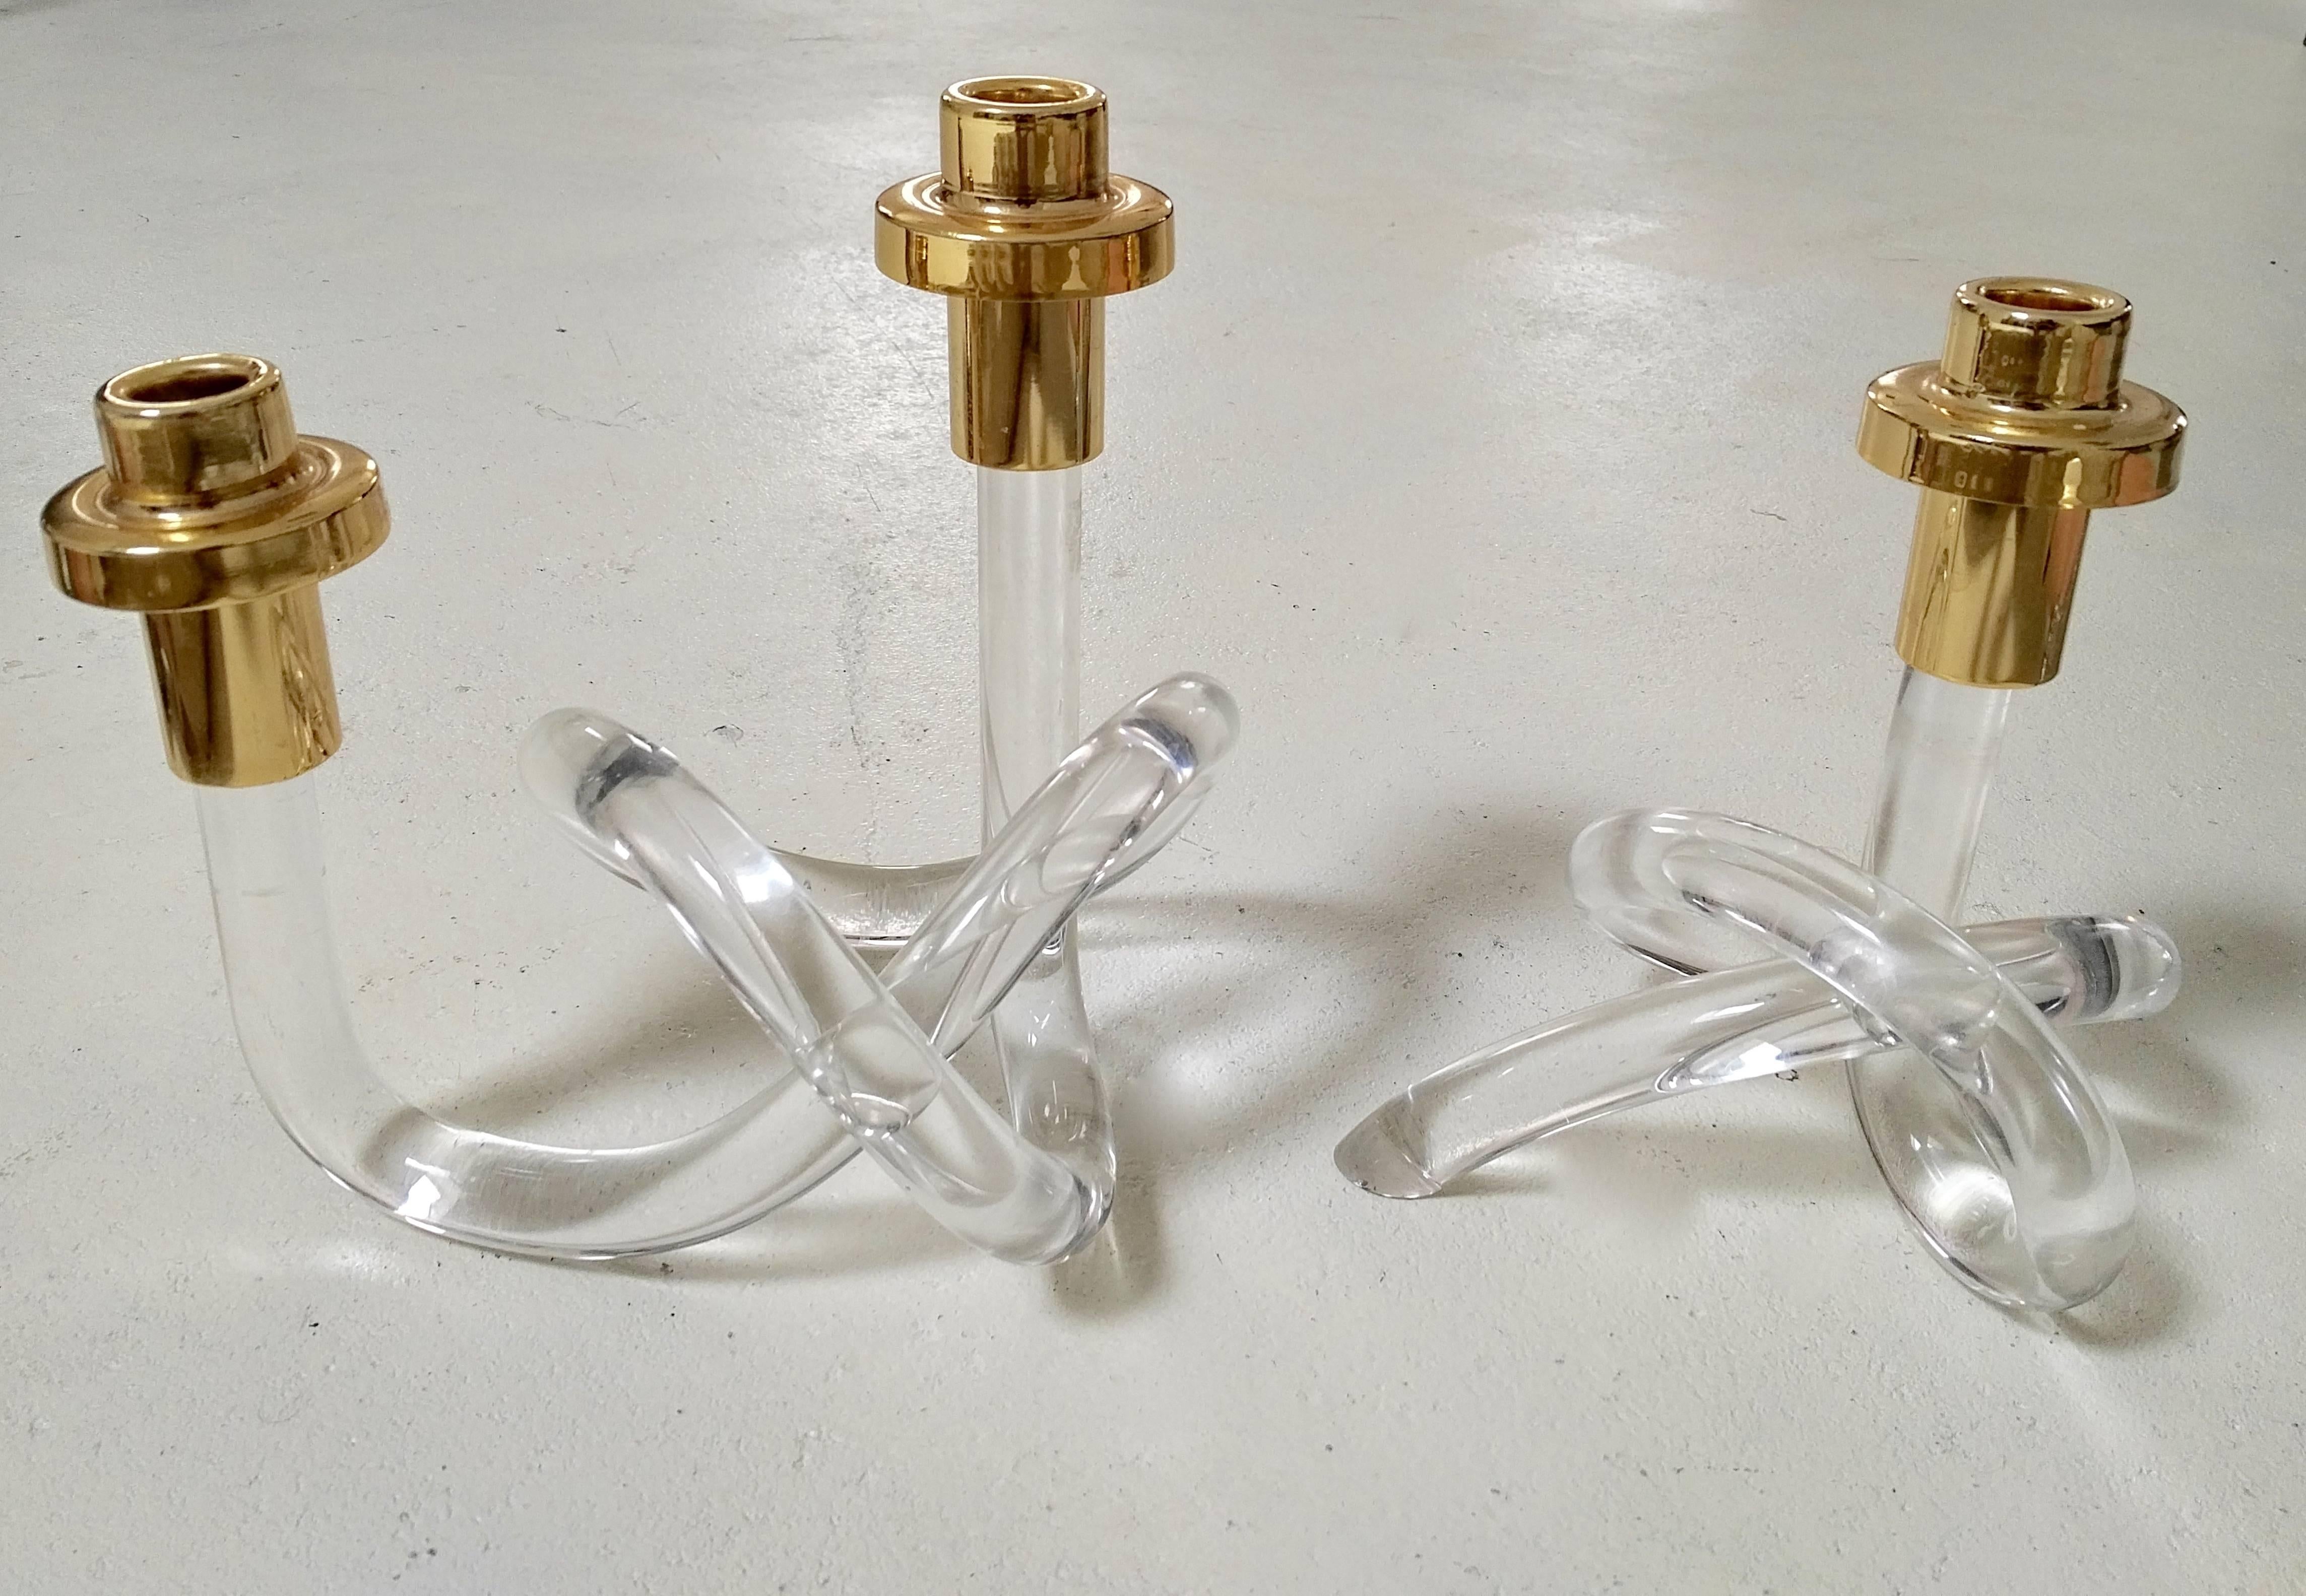 Beautiful pair of twisted Lucite and gold candleholders. These 'pretzel' shaped candleholders are a modernist icon. Dorothy Thorpe was a Pioneer in using this transparent acrylic material, experimenting with it since the early 1940s. This is truly